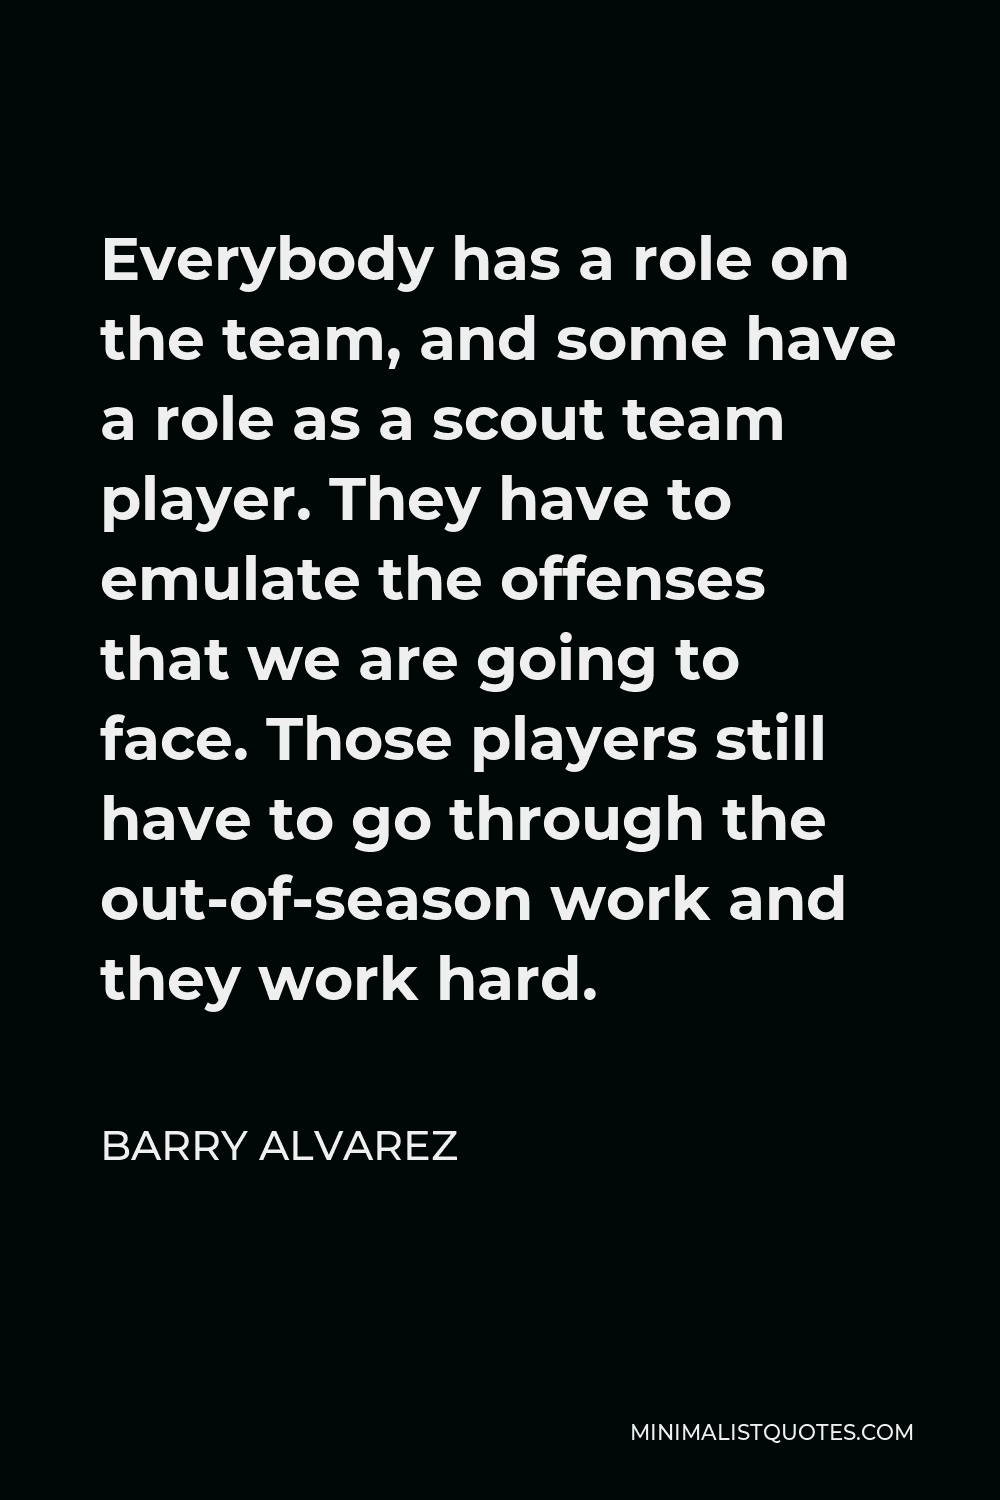 Barry Alvarez Quote - Everybody has a role on the team, and some have a role as a scout team player. They have to emulate the offenses that we are going to face. Those players still have to go through the out-of-season work and they work hard.